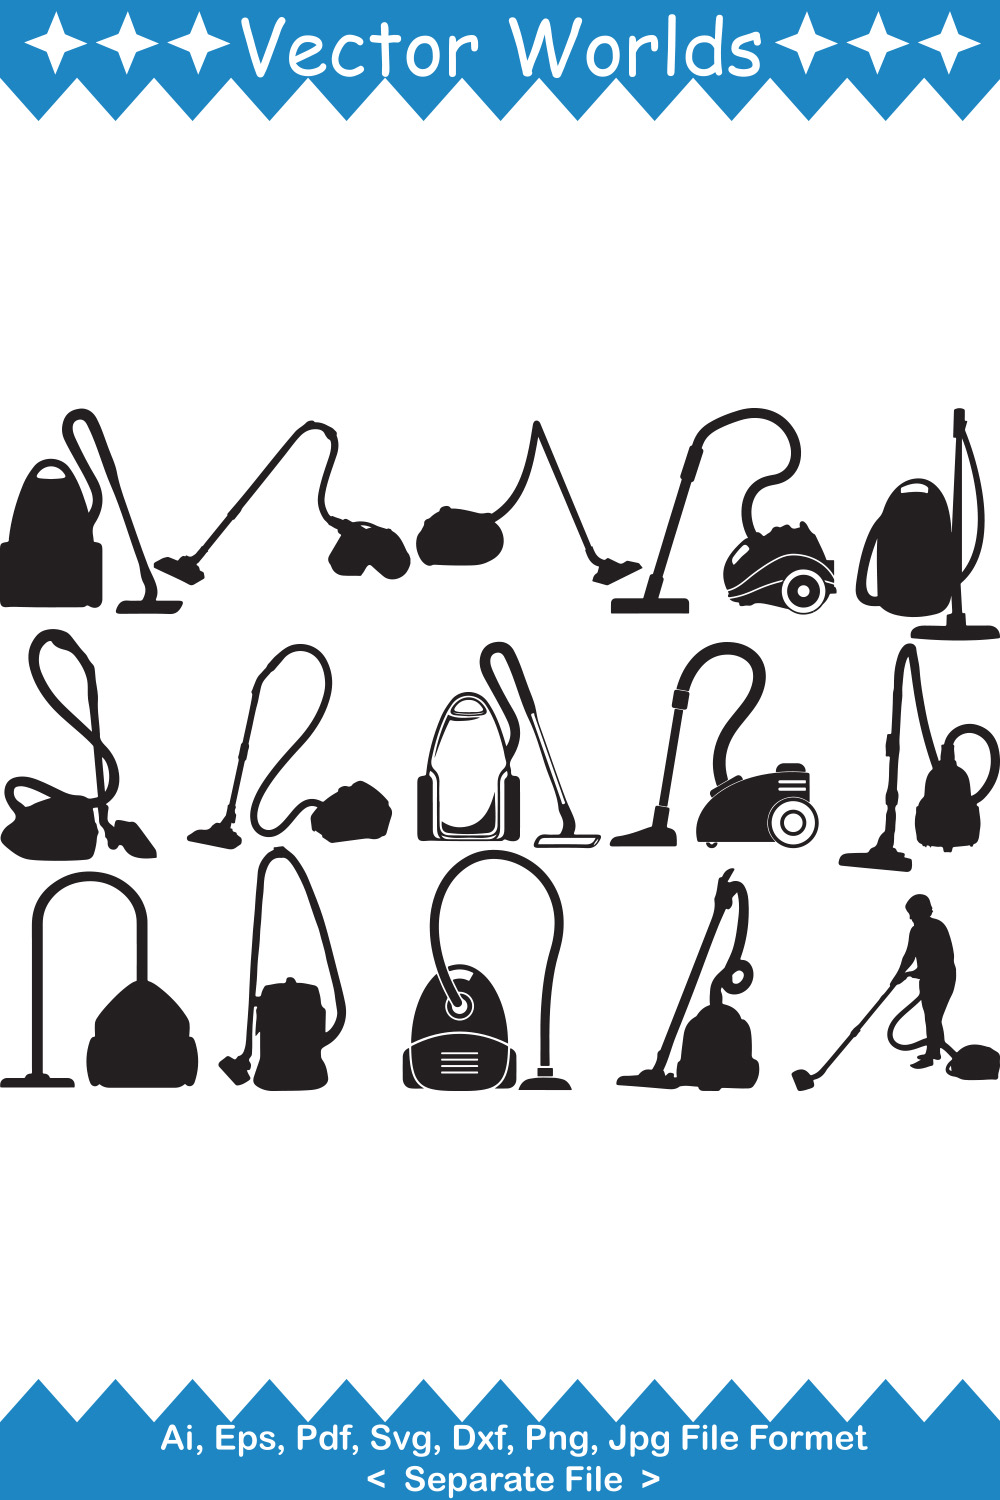 Set of vector unique images of silhouettes of vacuum cleaners.